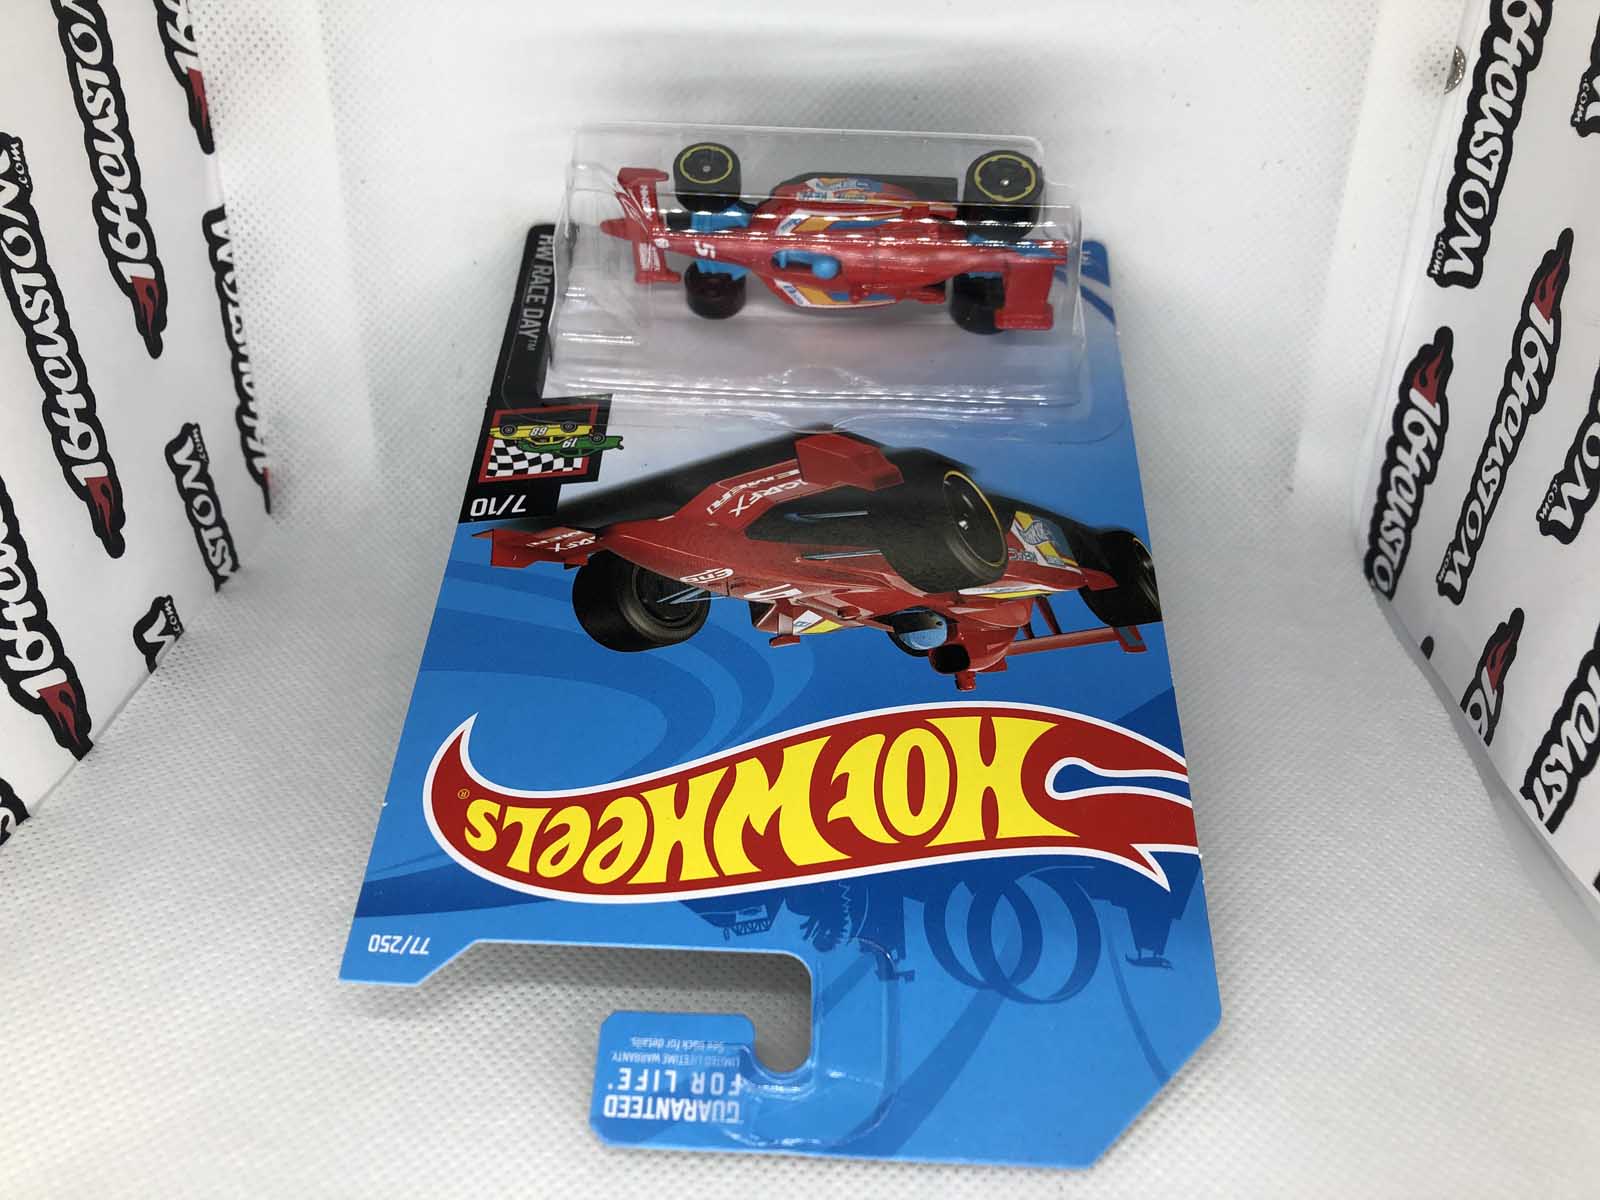 Indy 500 Oval Hot Wheels